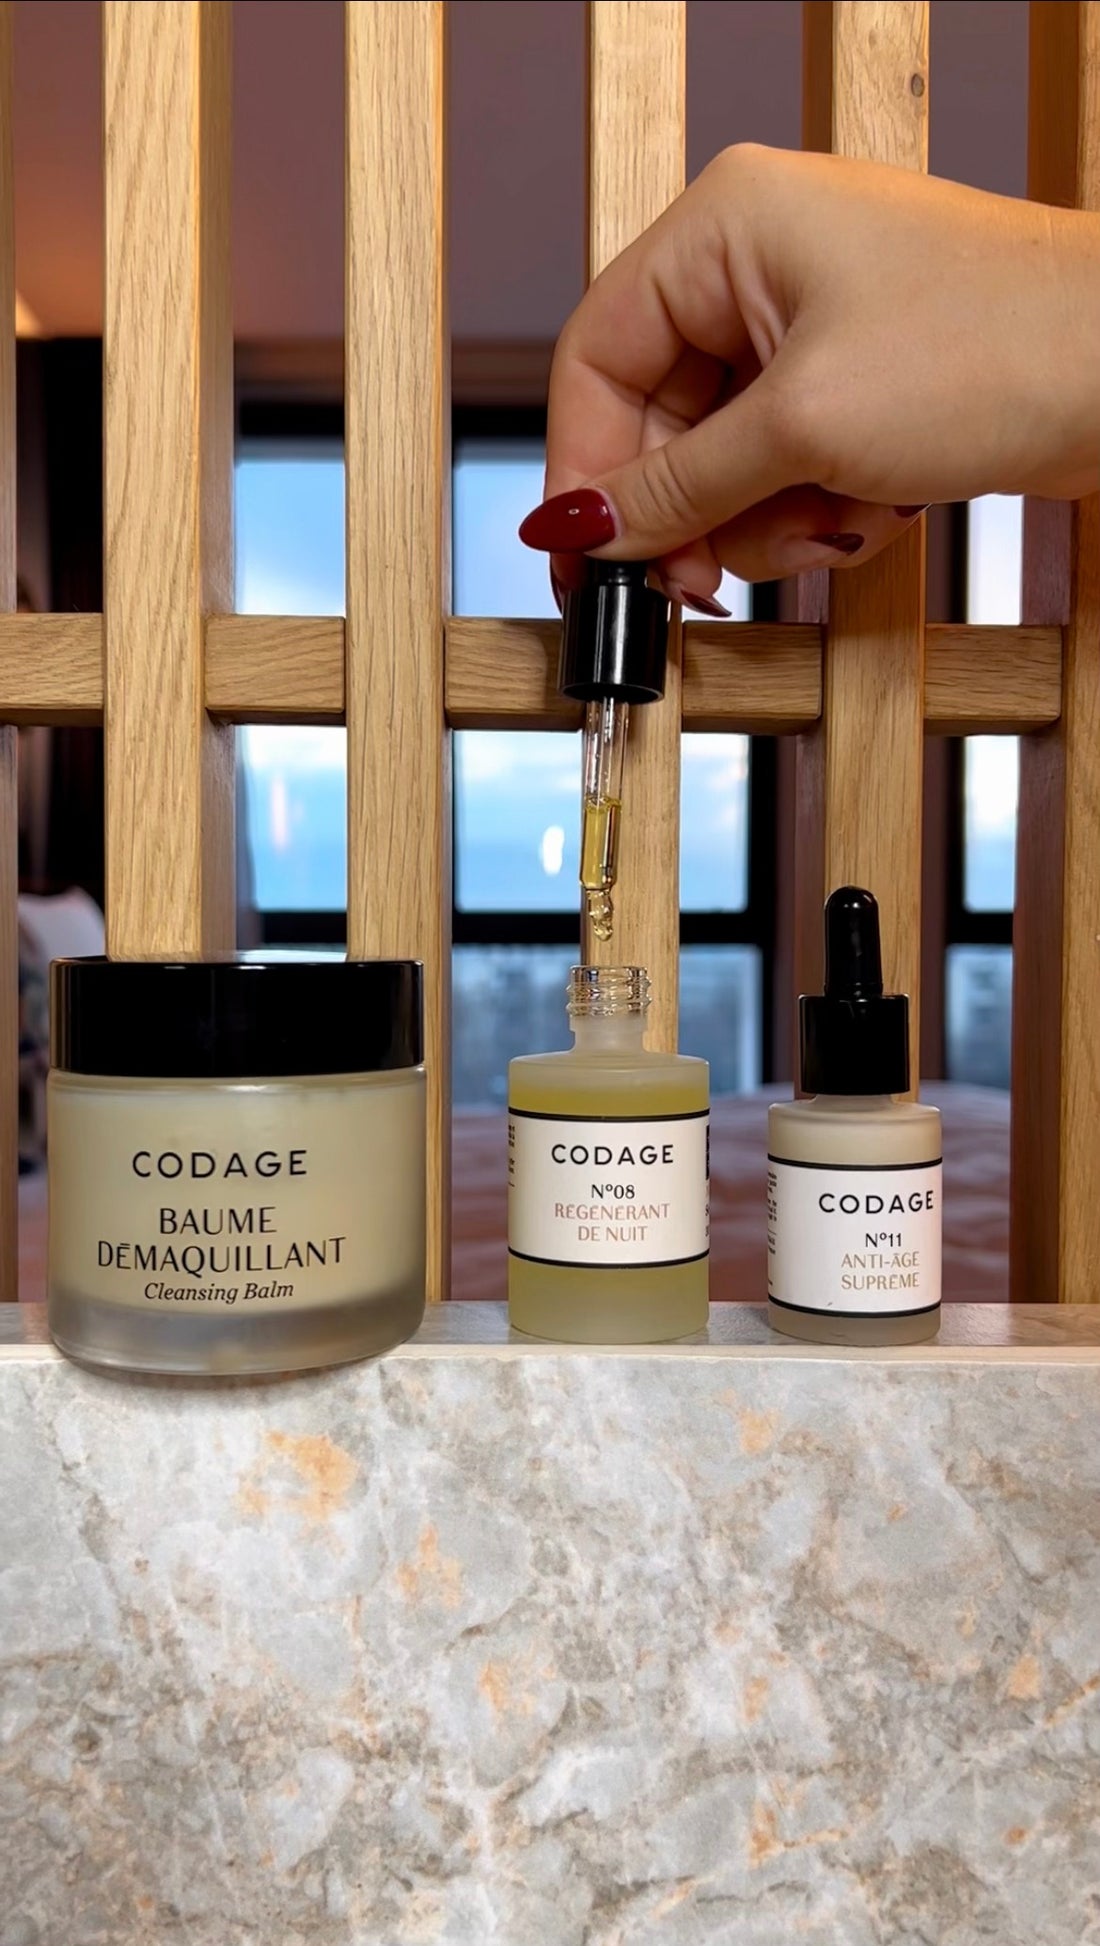 DAY 21: CODAGE Paris x @brunebbnew Competition